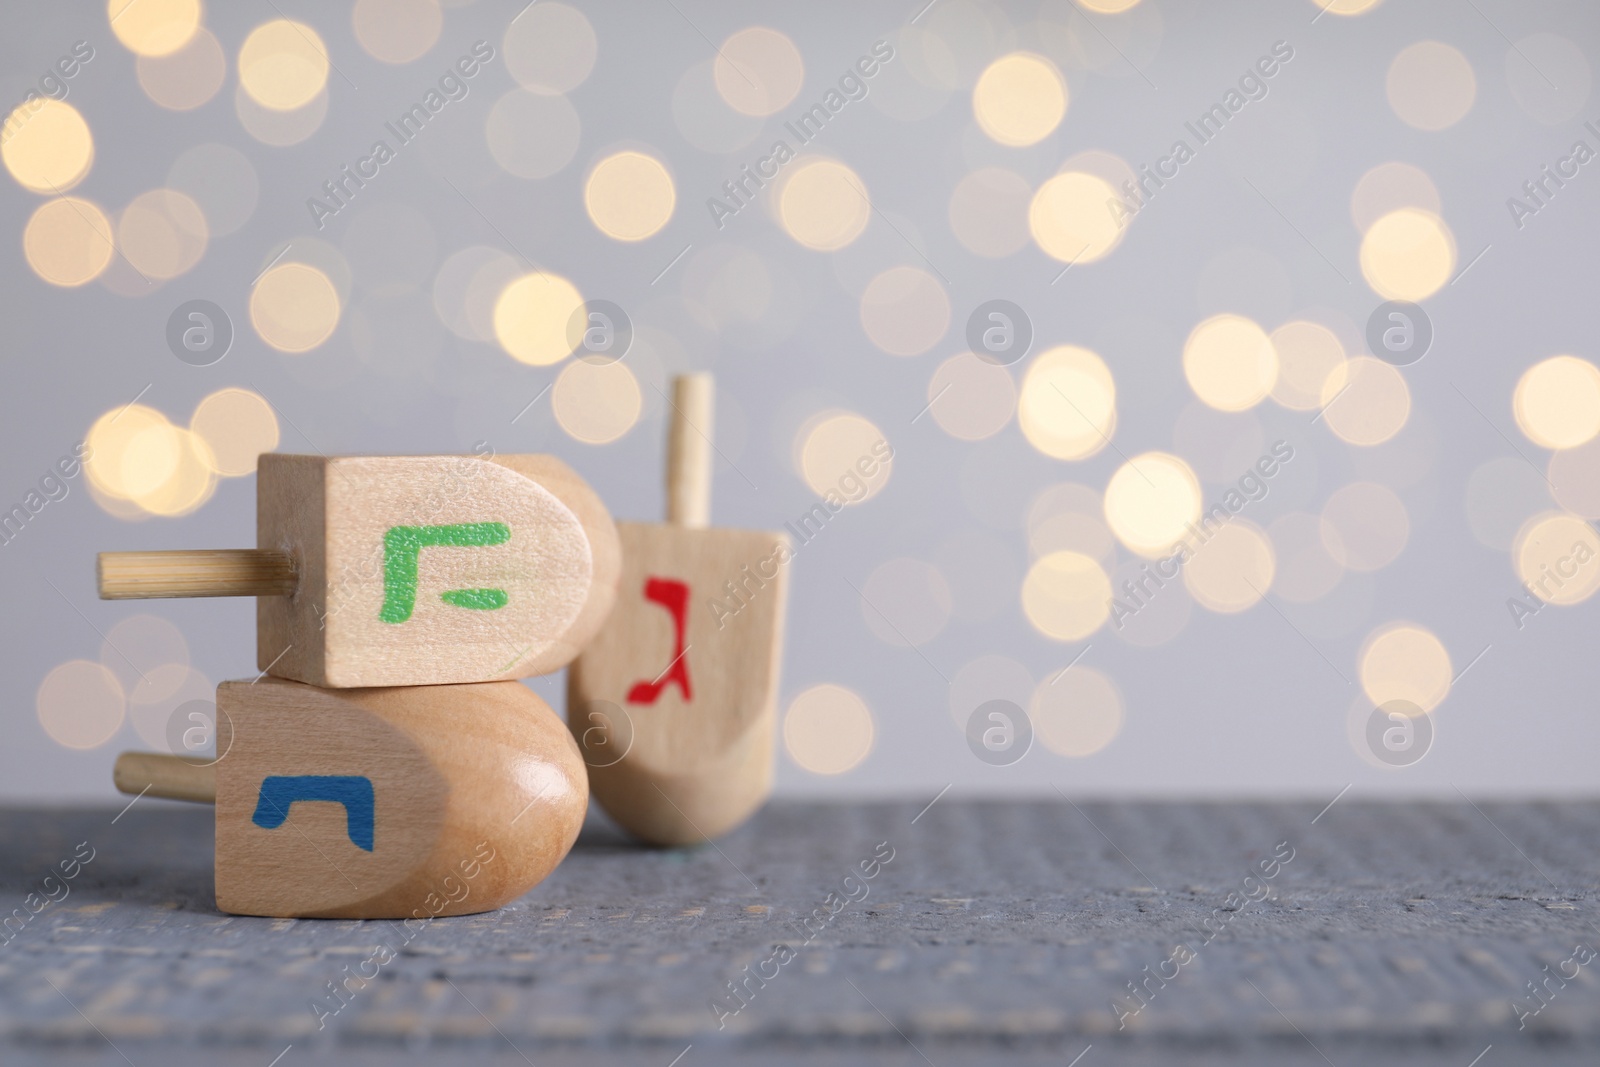 Photo of Hanukkah traditional dreidels with letters Nun, He and Gimel on grey wooden table against blurred lights. Space for text